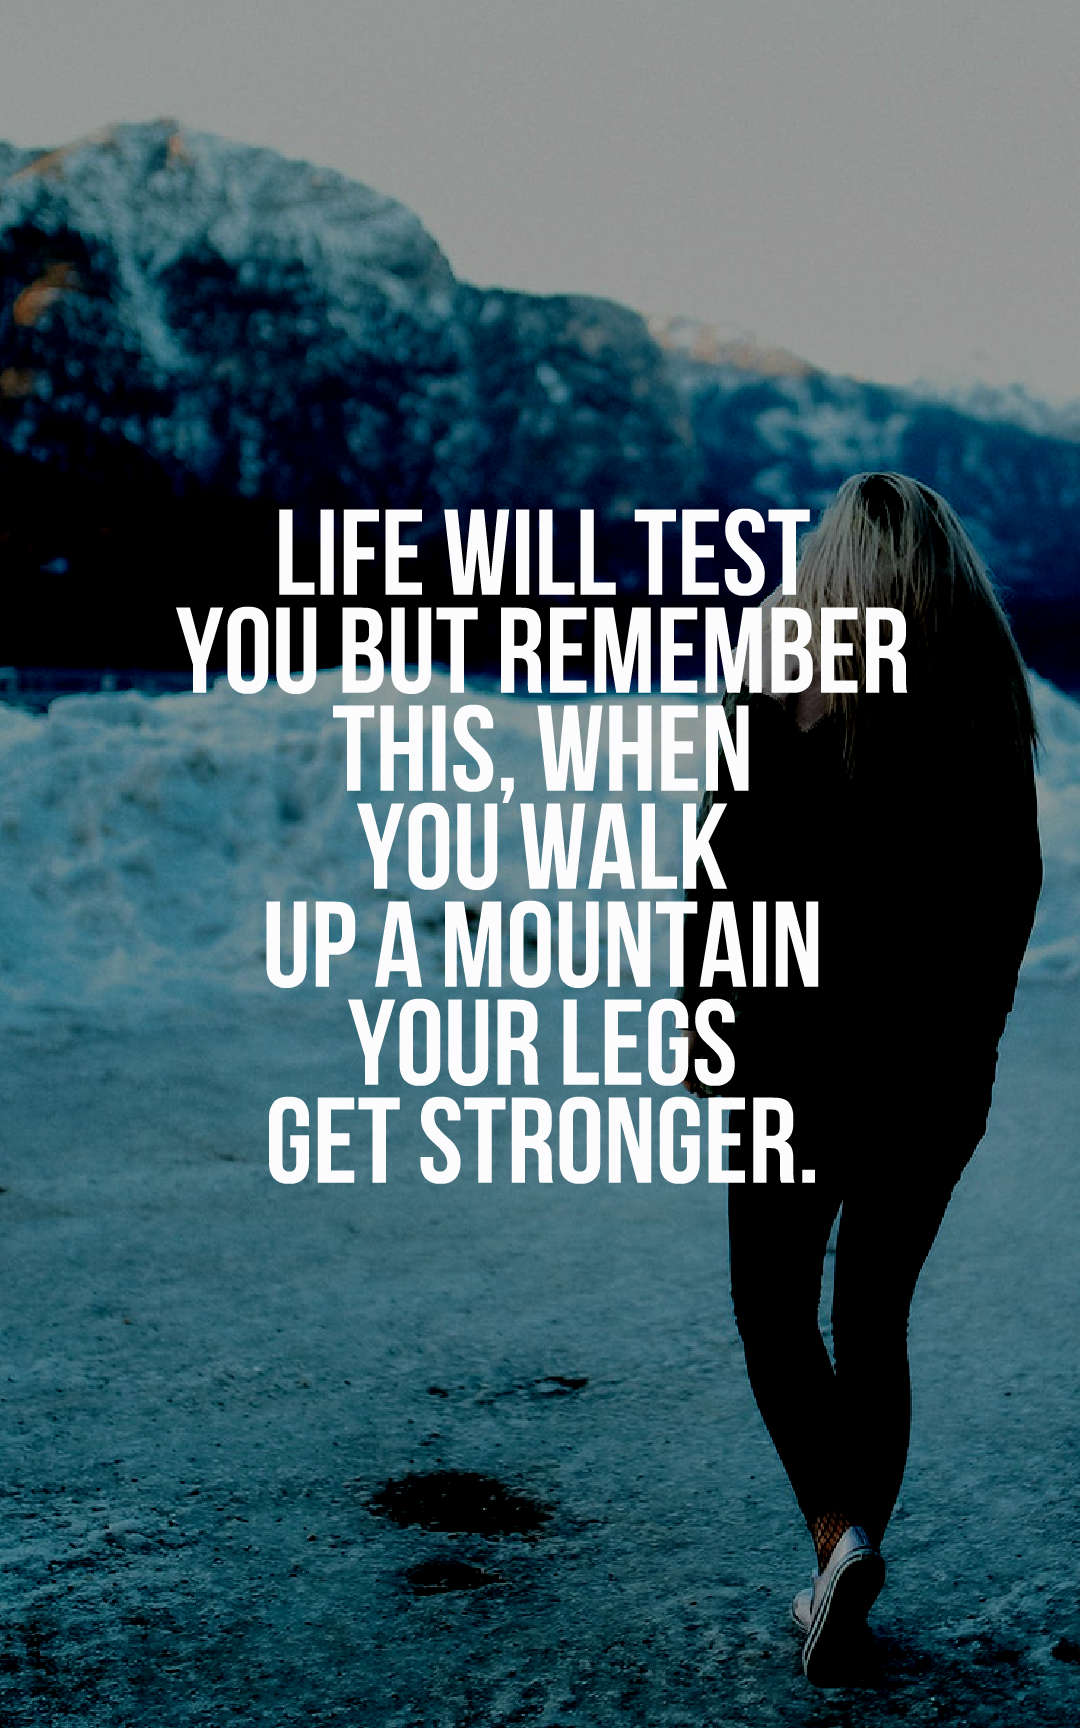 Life will test you but remember this, when you walk up a mountain your legs get stronger.